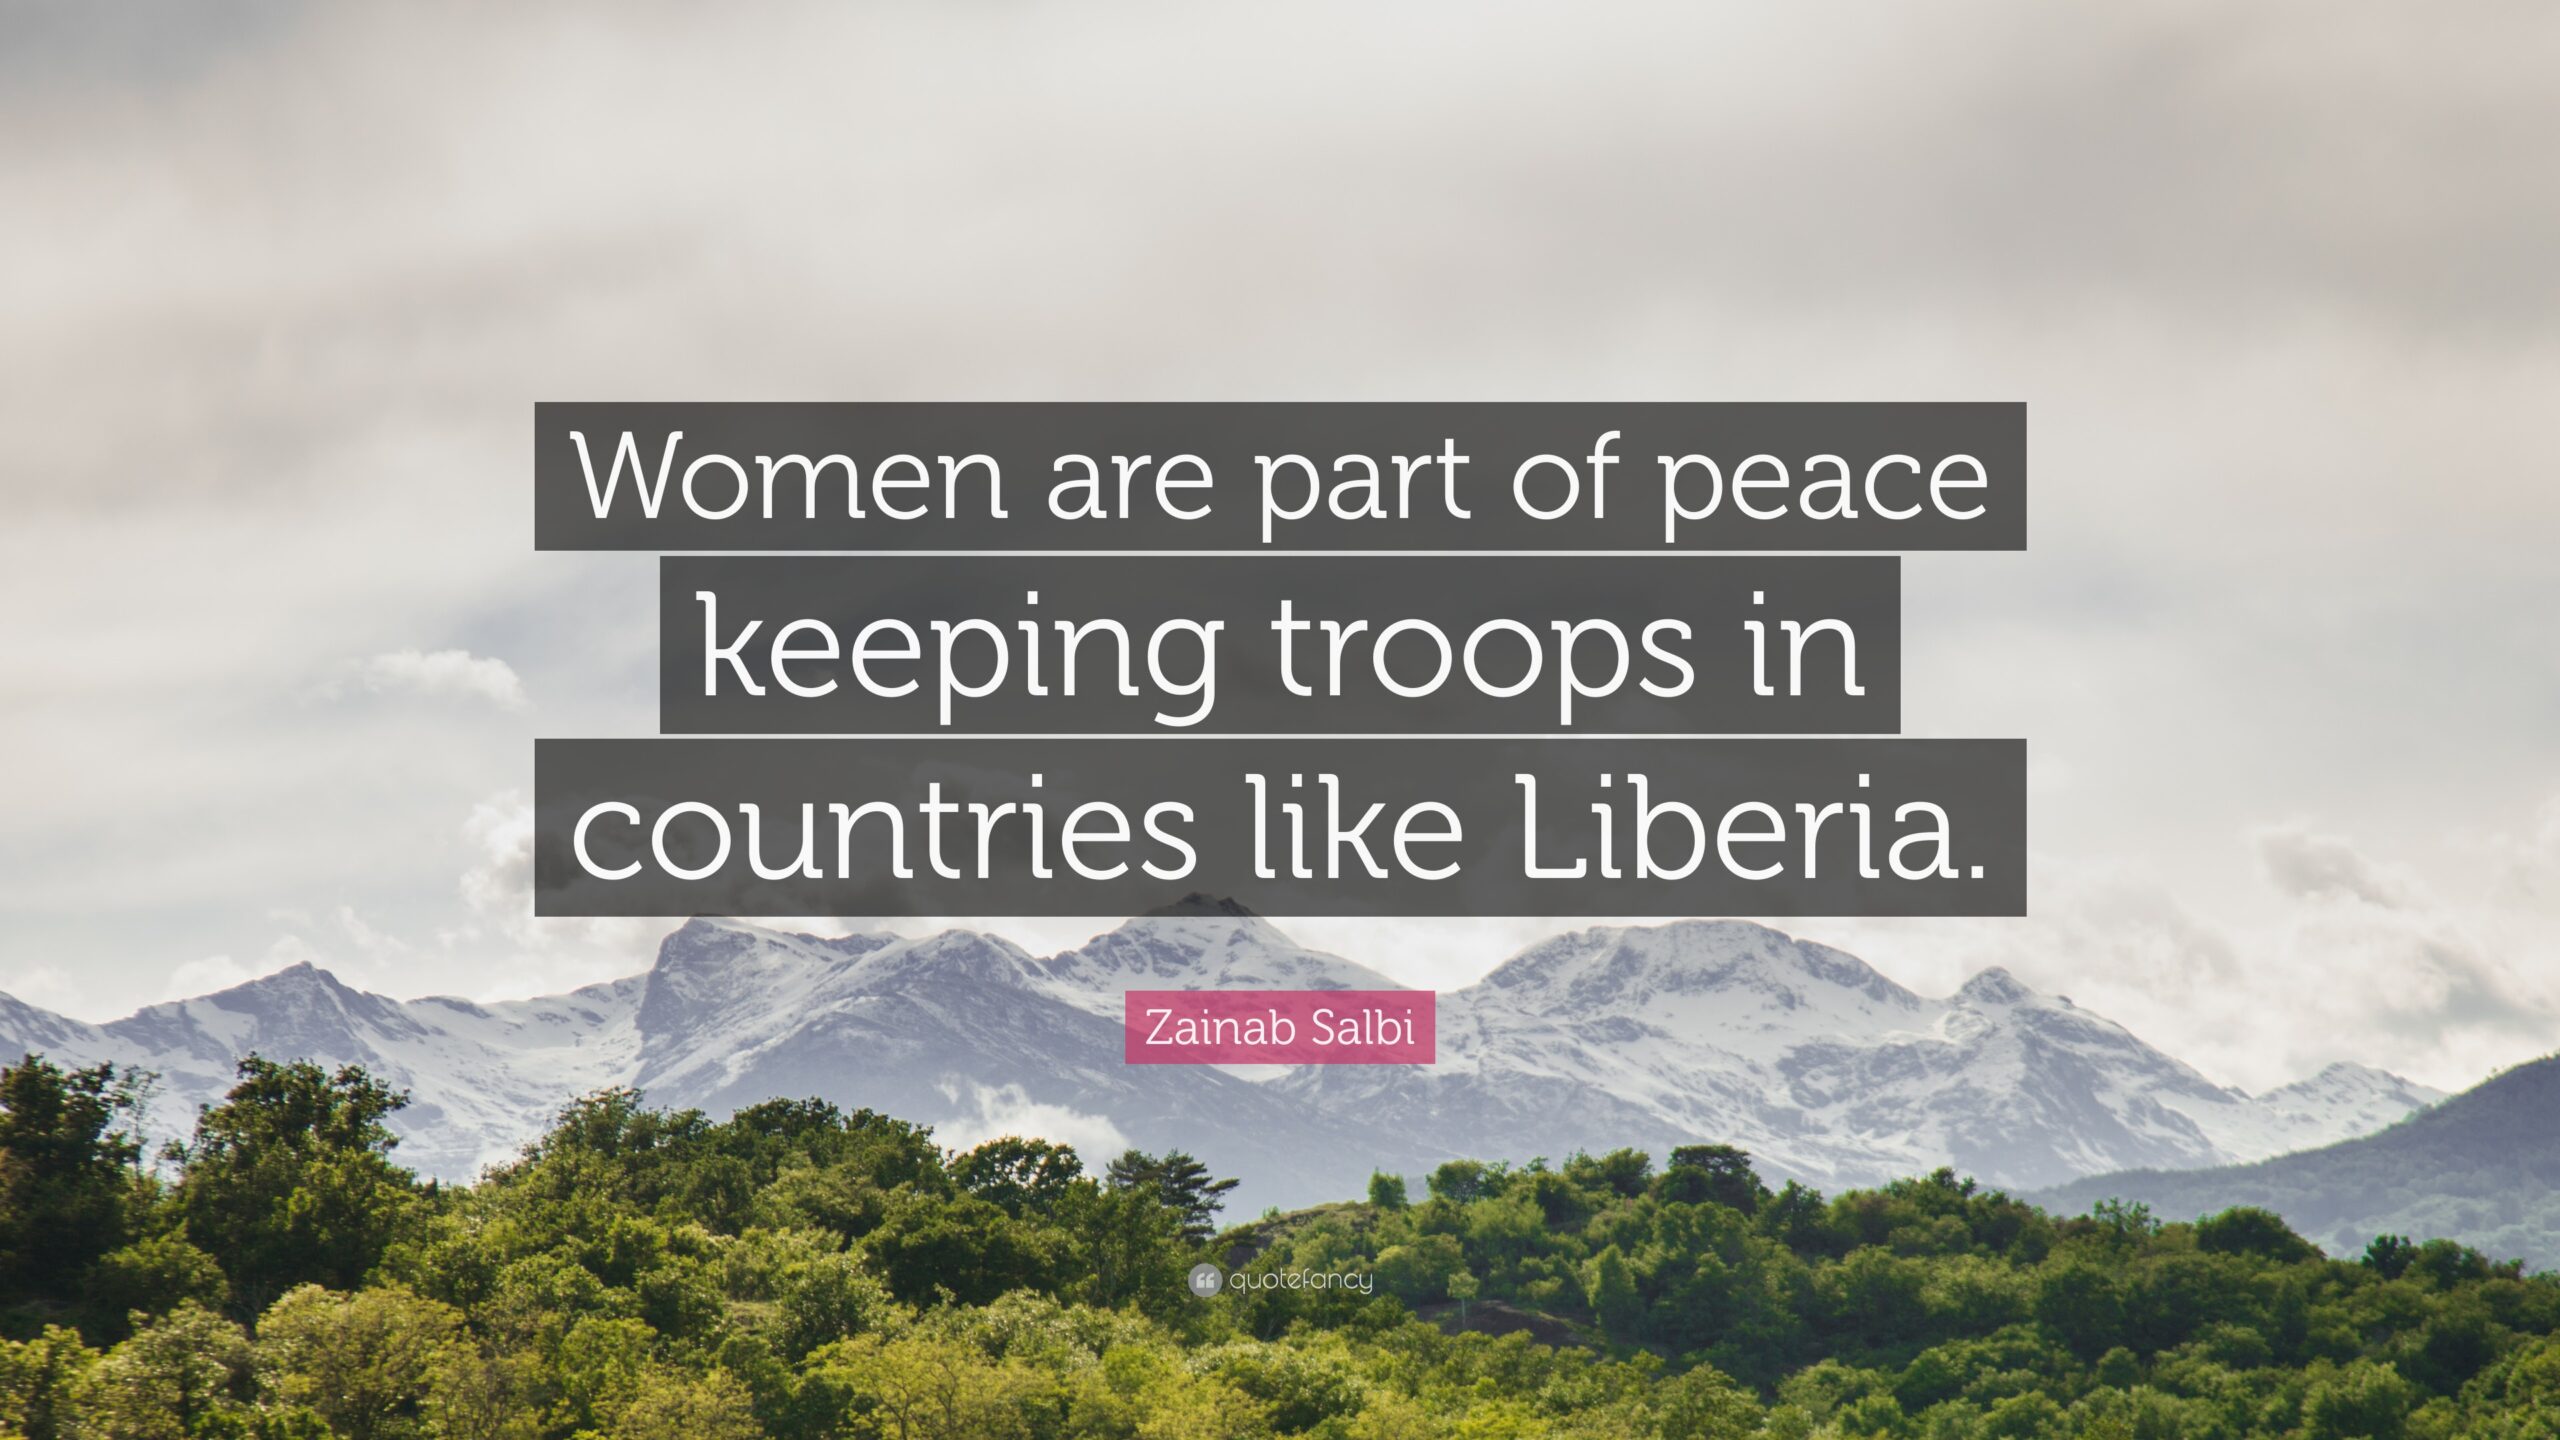 Zainab Salbi Quote: “Women are part of peace keeping troops in